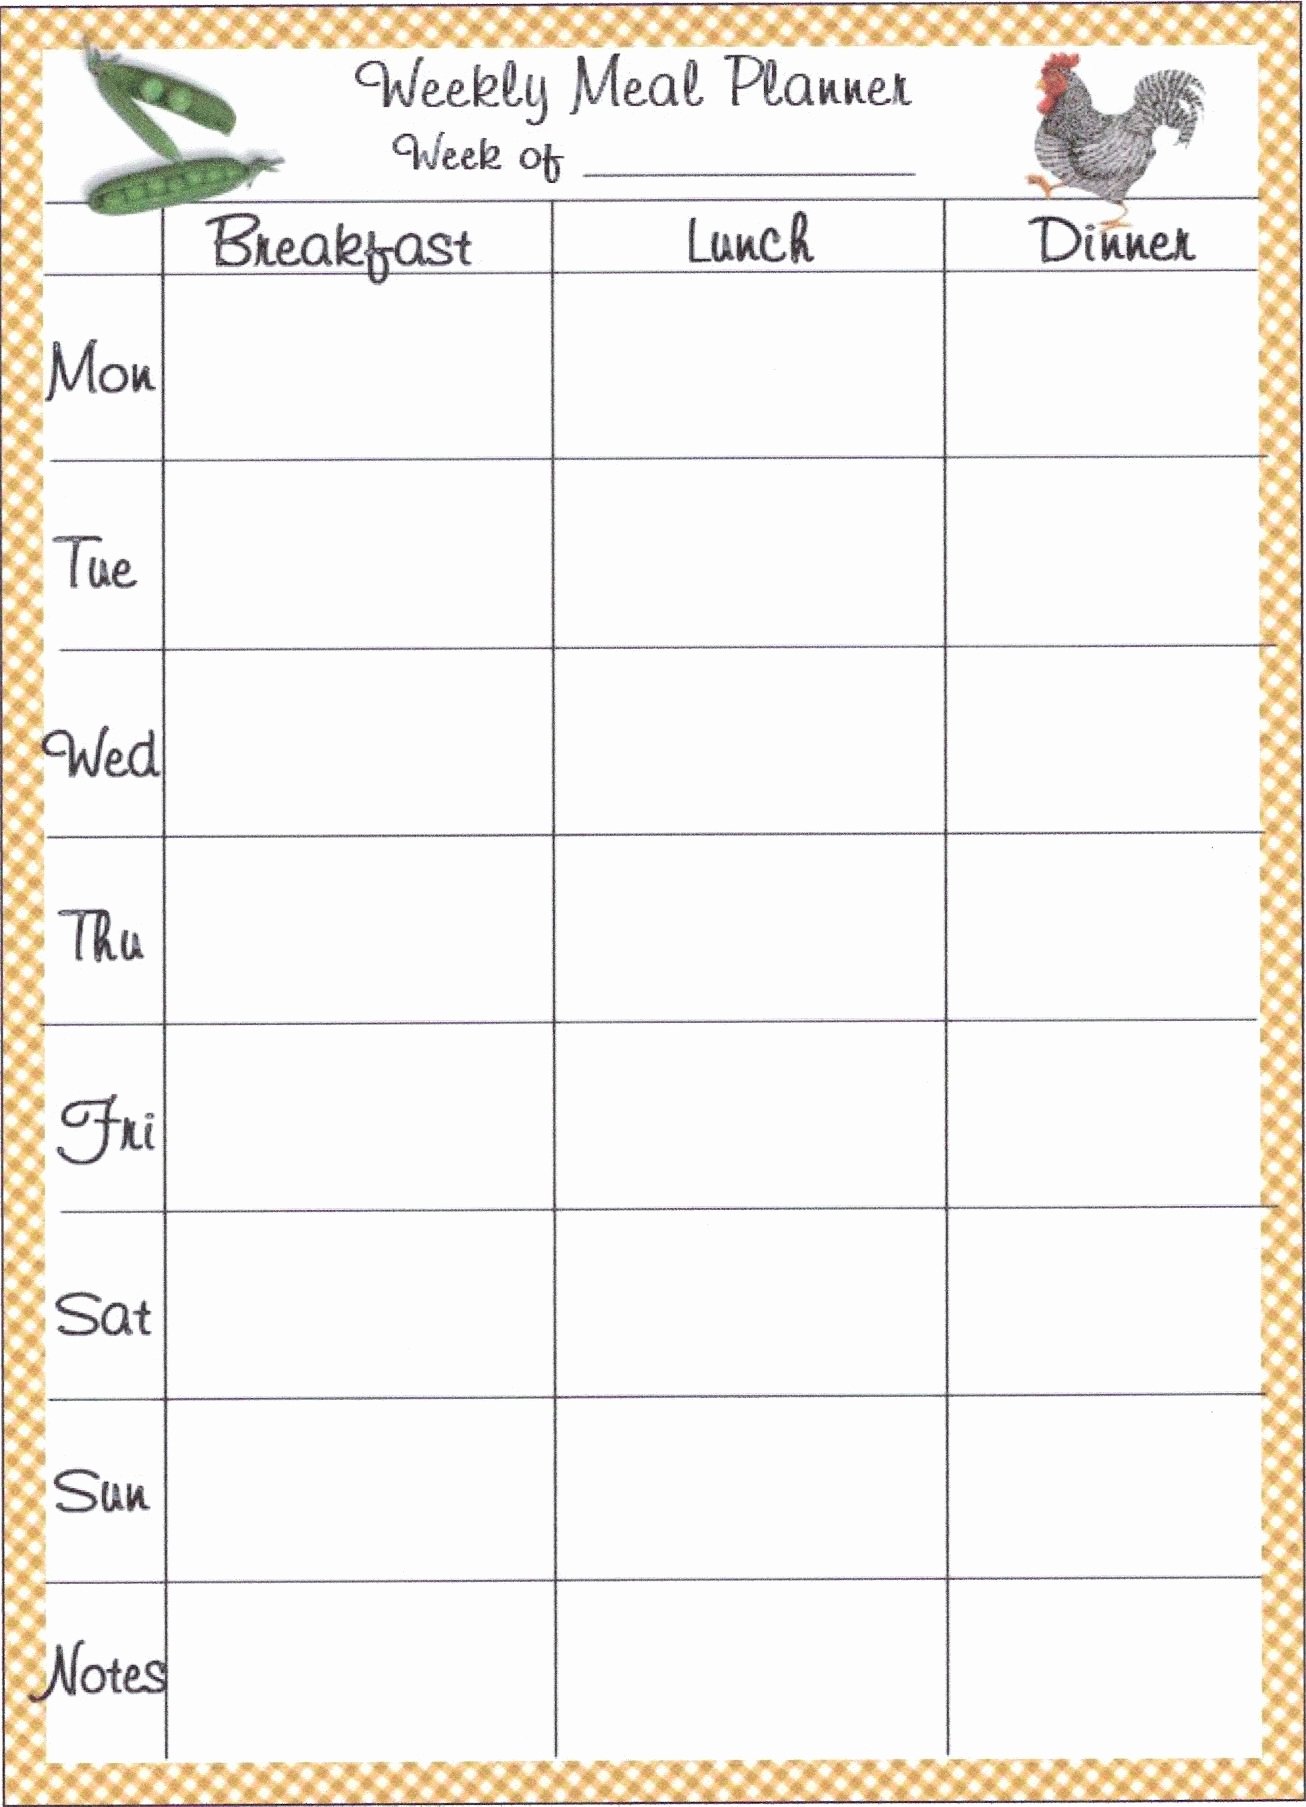 Daily Meal Plan Template Unique Meal Planner Template Planning Meals is One Of the